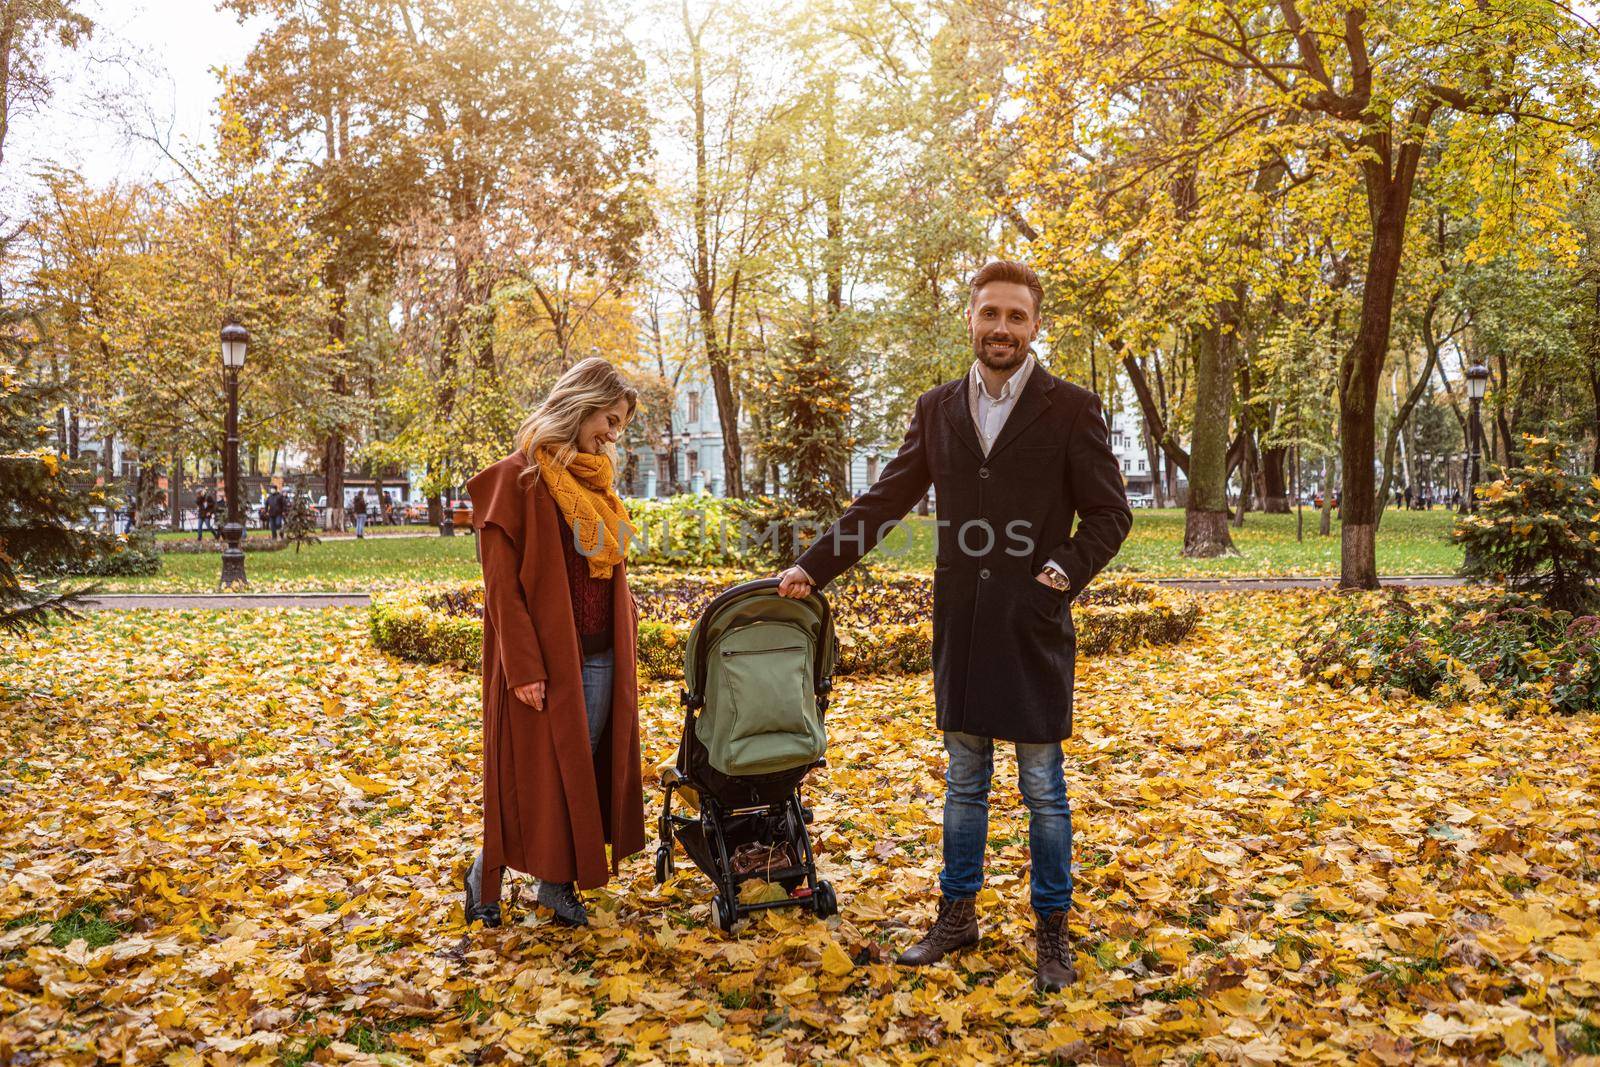 Walking in an autumn park young family with a newborn baby in a stroller. Family outdoors in a golden autumn park. Tinted image by LipikStockMedia